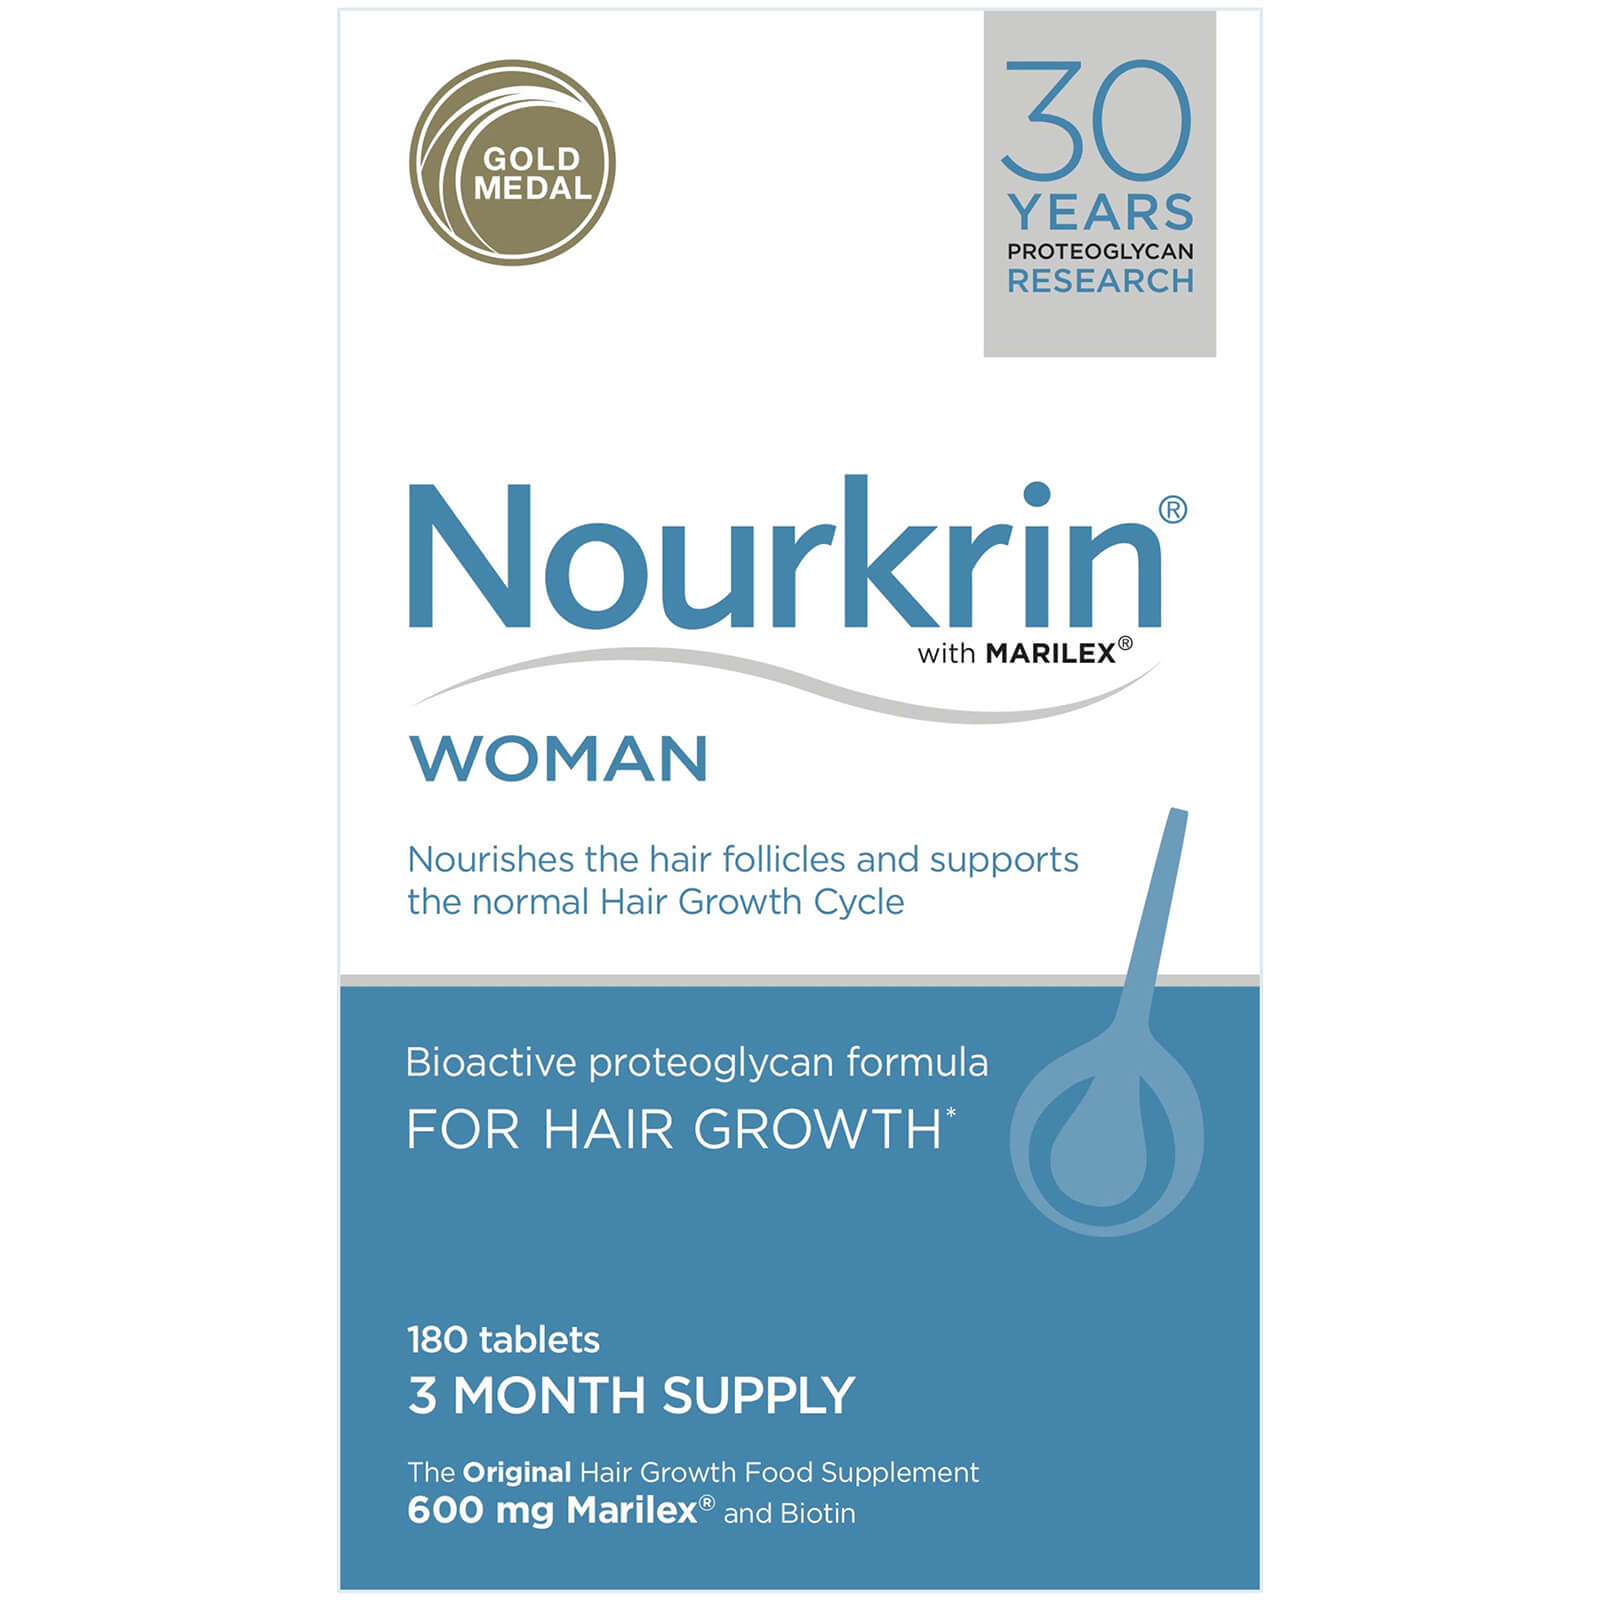 Nourkrin Woman - 3 Month Supply (180 Tablets)